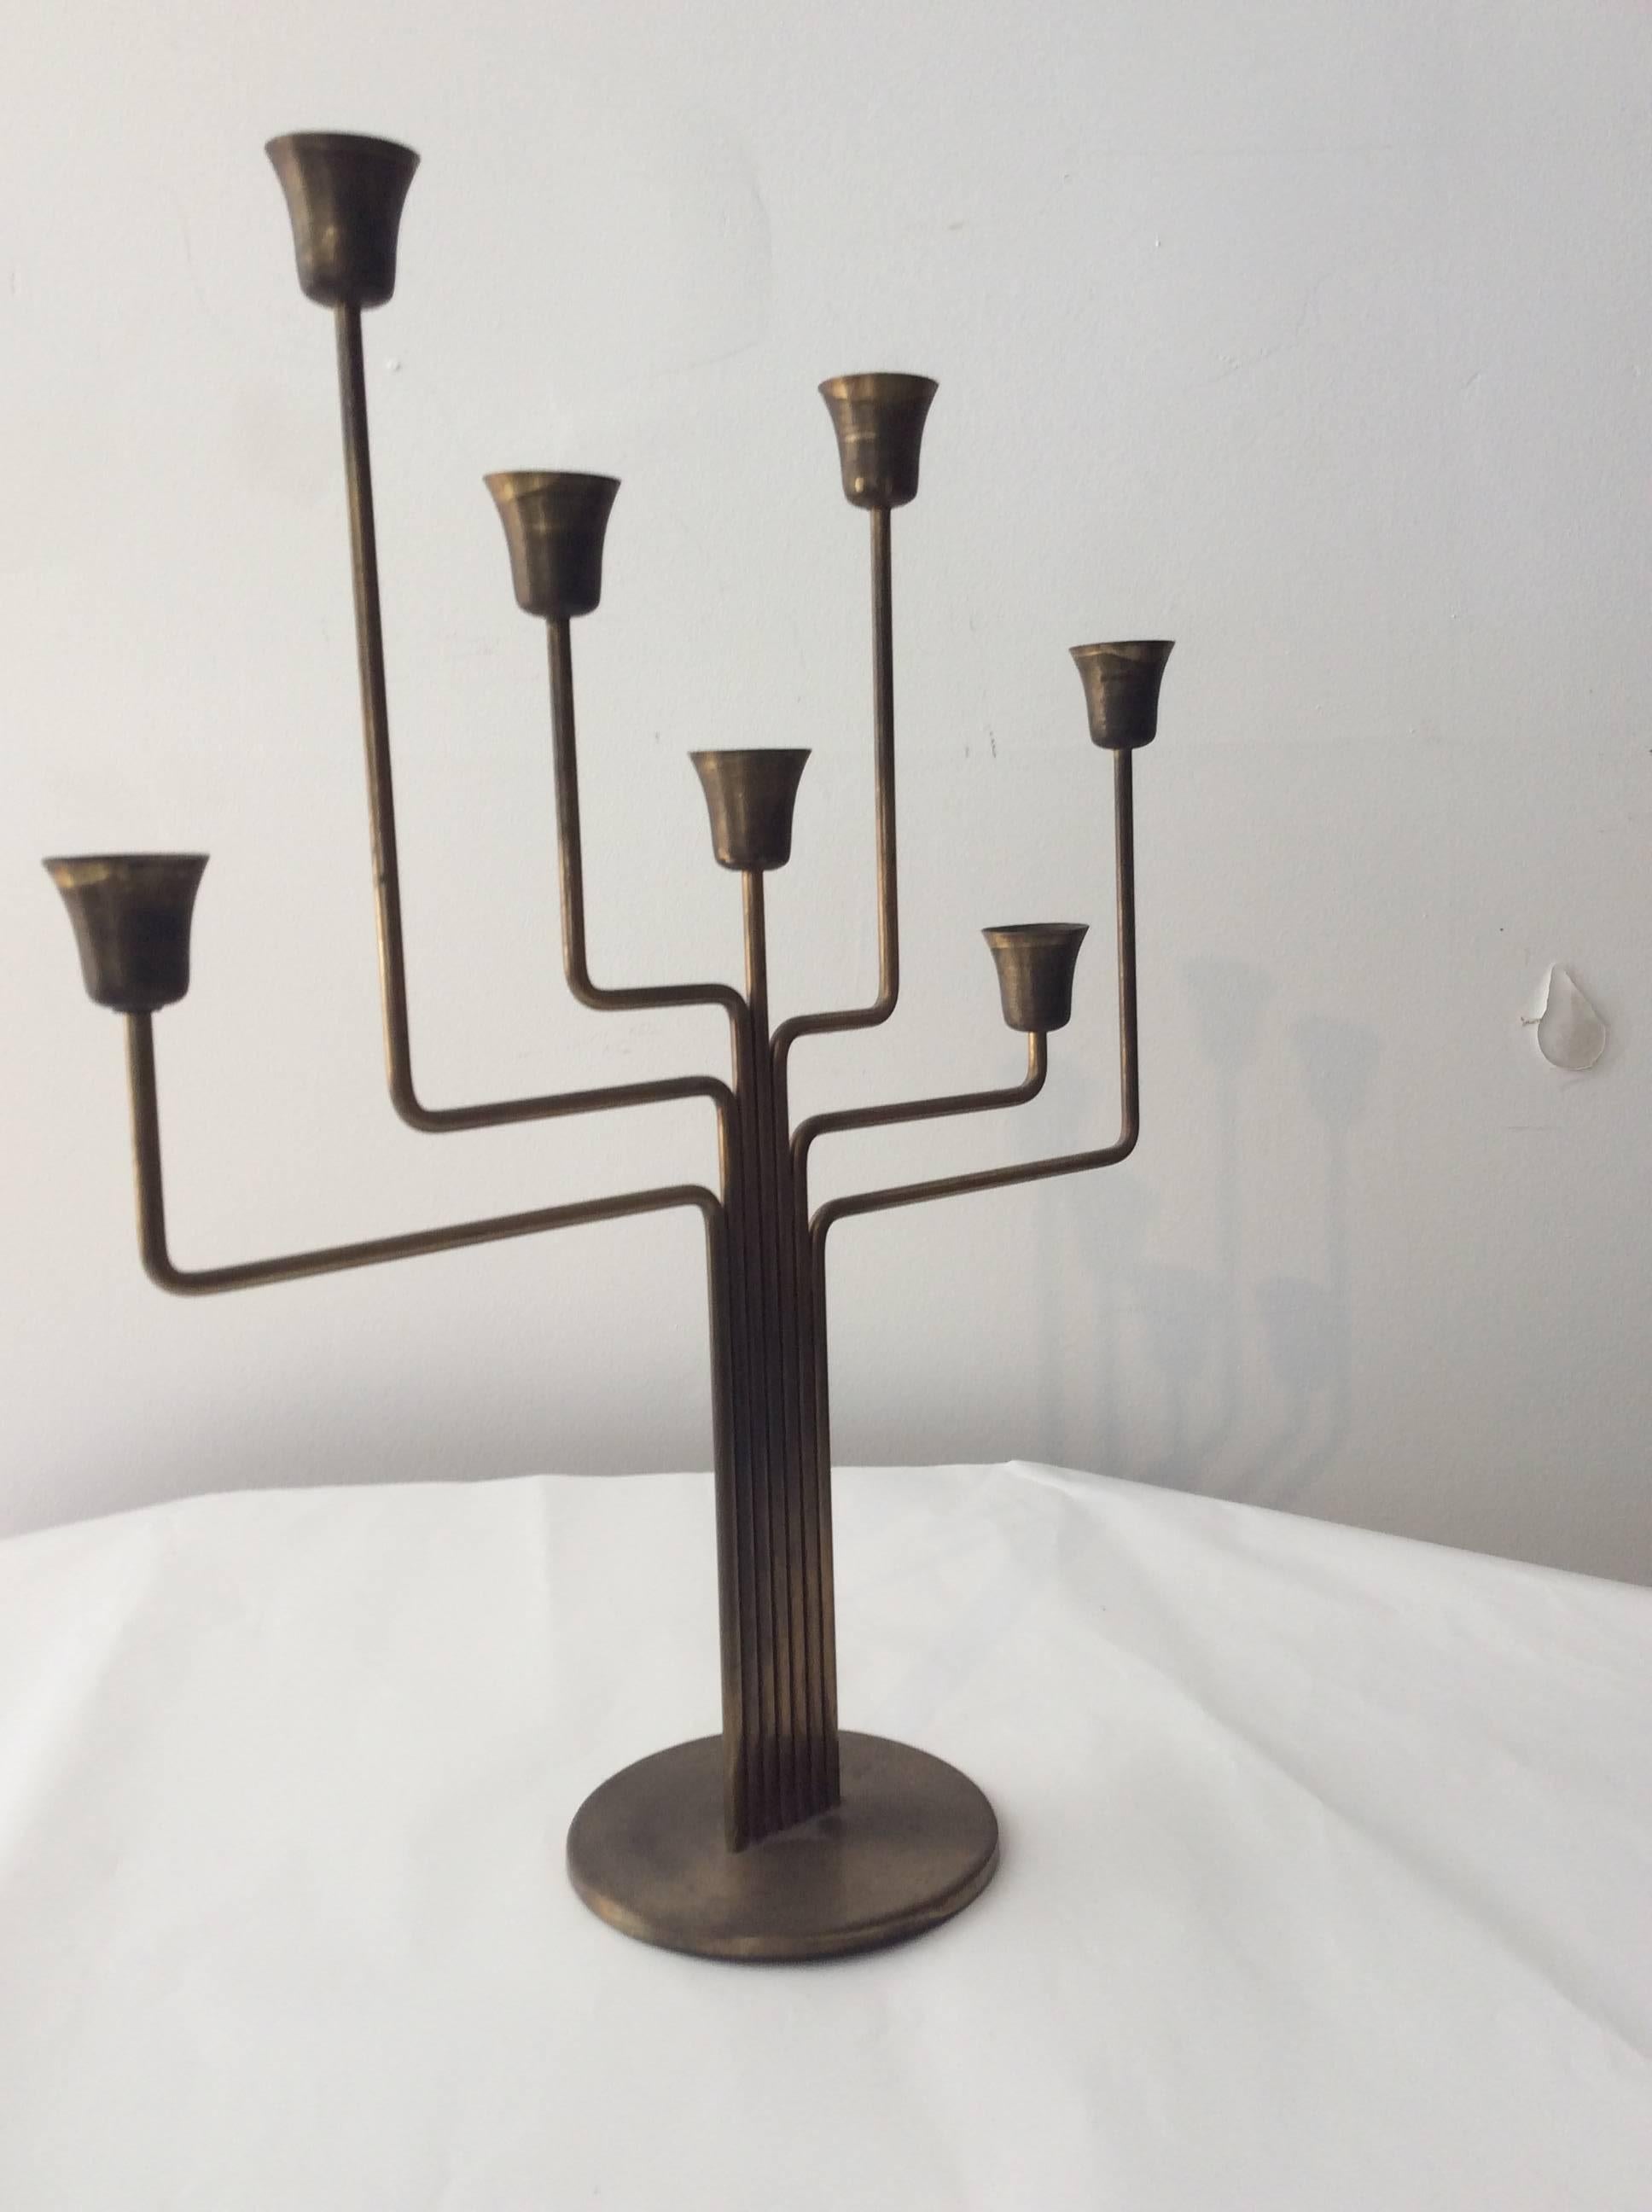 You are looking at a vintage Scandinavian brass candelabra designed by either Svend Aage or Kasper Schultz for Holm Sorensen. This candelabra is similar to Piet Heins design. The brass has acquired a wonderful patina with age. Candelabra is signed